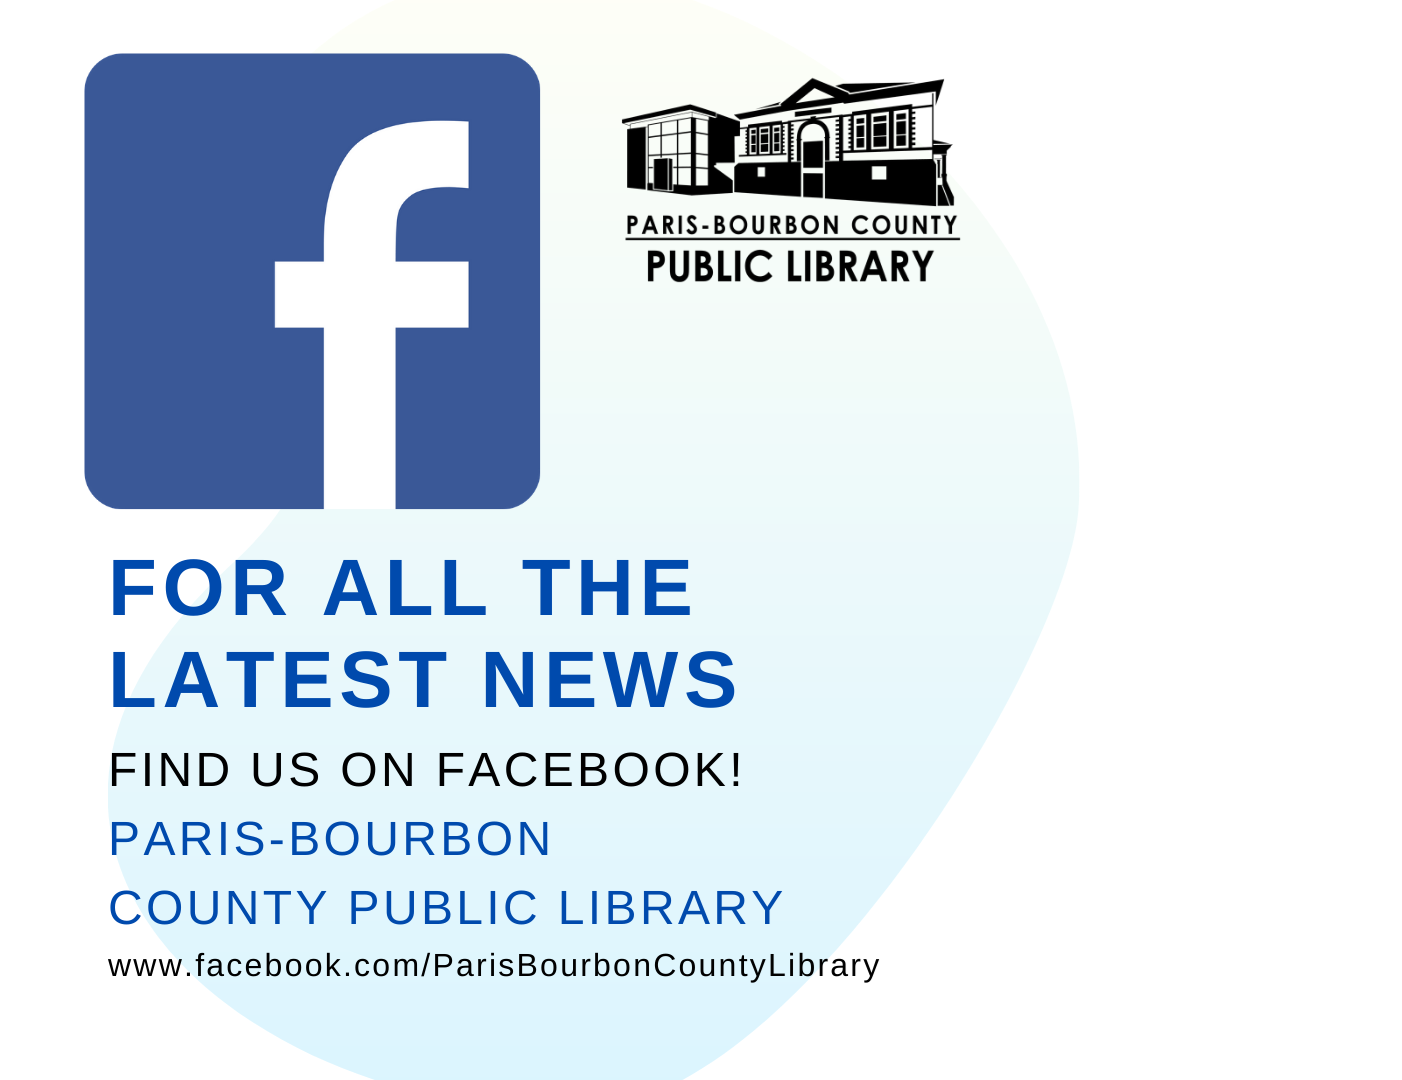 Library Facebook Page